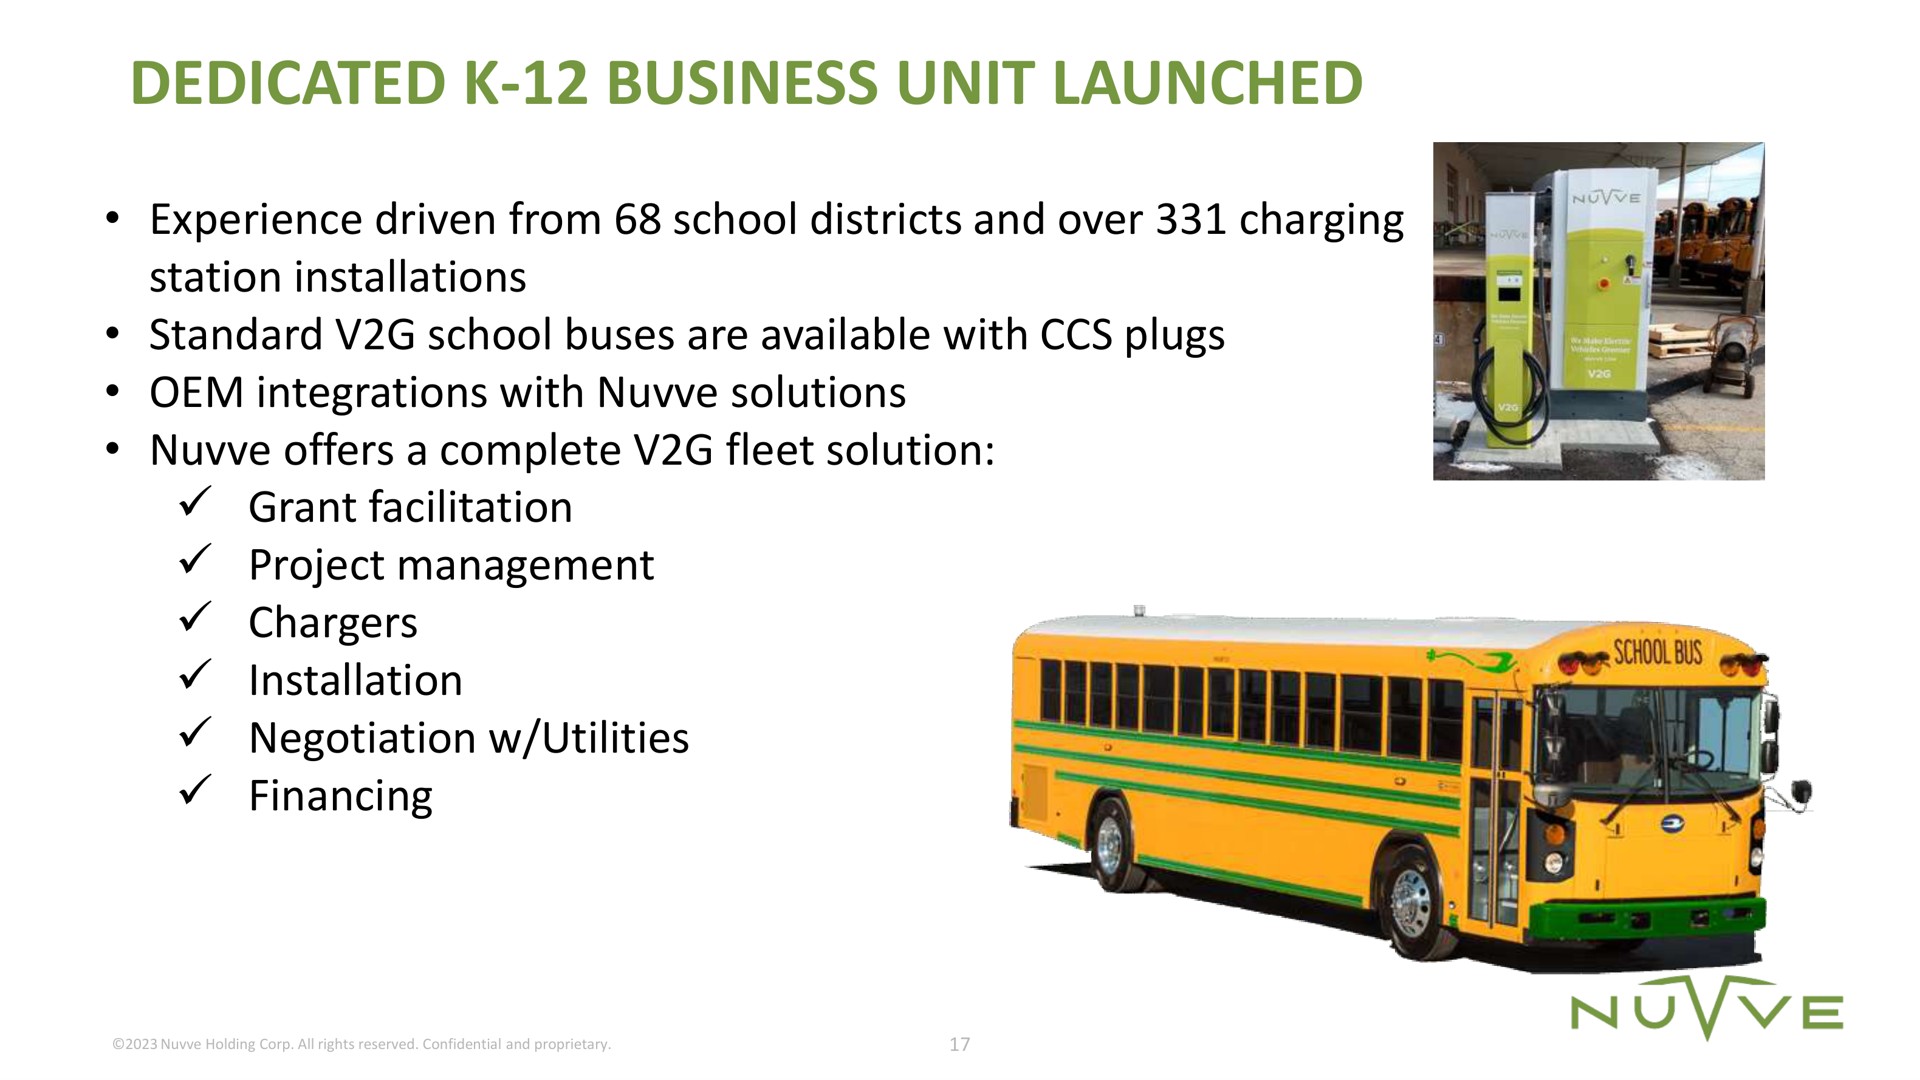 dedicated business unit launched experience driven from school districts and over charging station installations standard school buses are available with plugs integrations with solutions offers a complete fleet solution grant facilitation project management chargers installation negotiation utilities | Nuvve